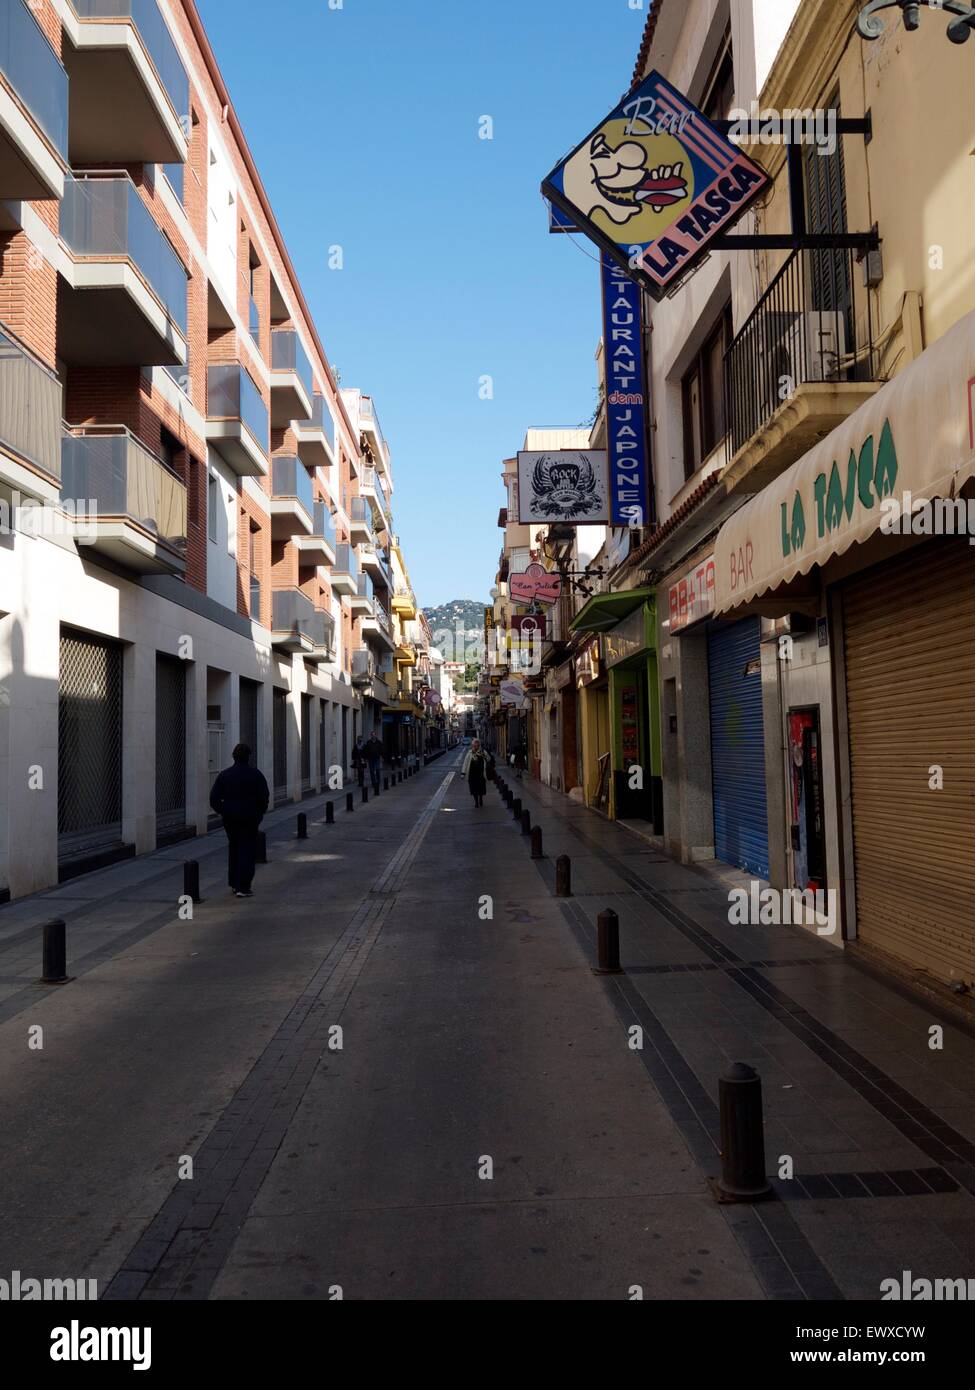 Typical street in Spain with shops and signs Stock Photo